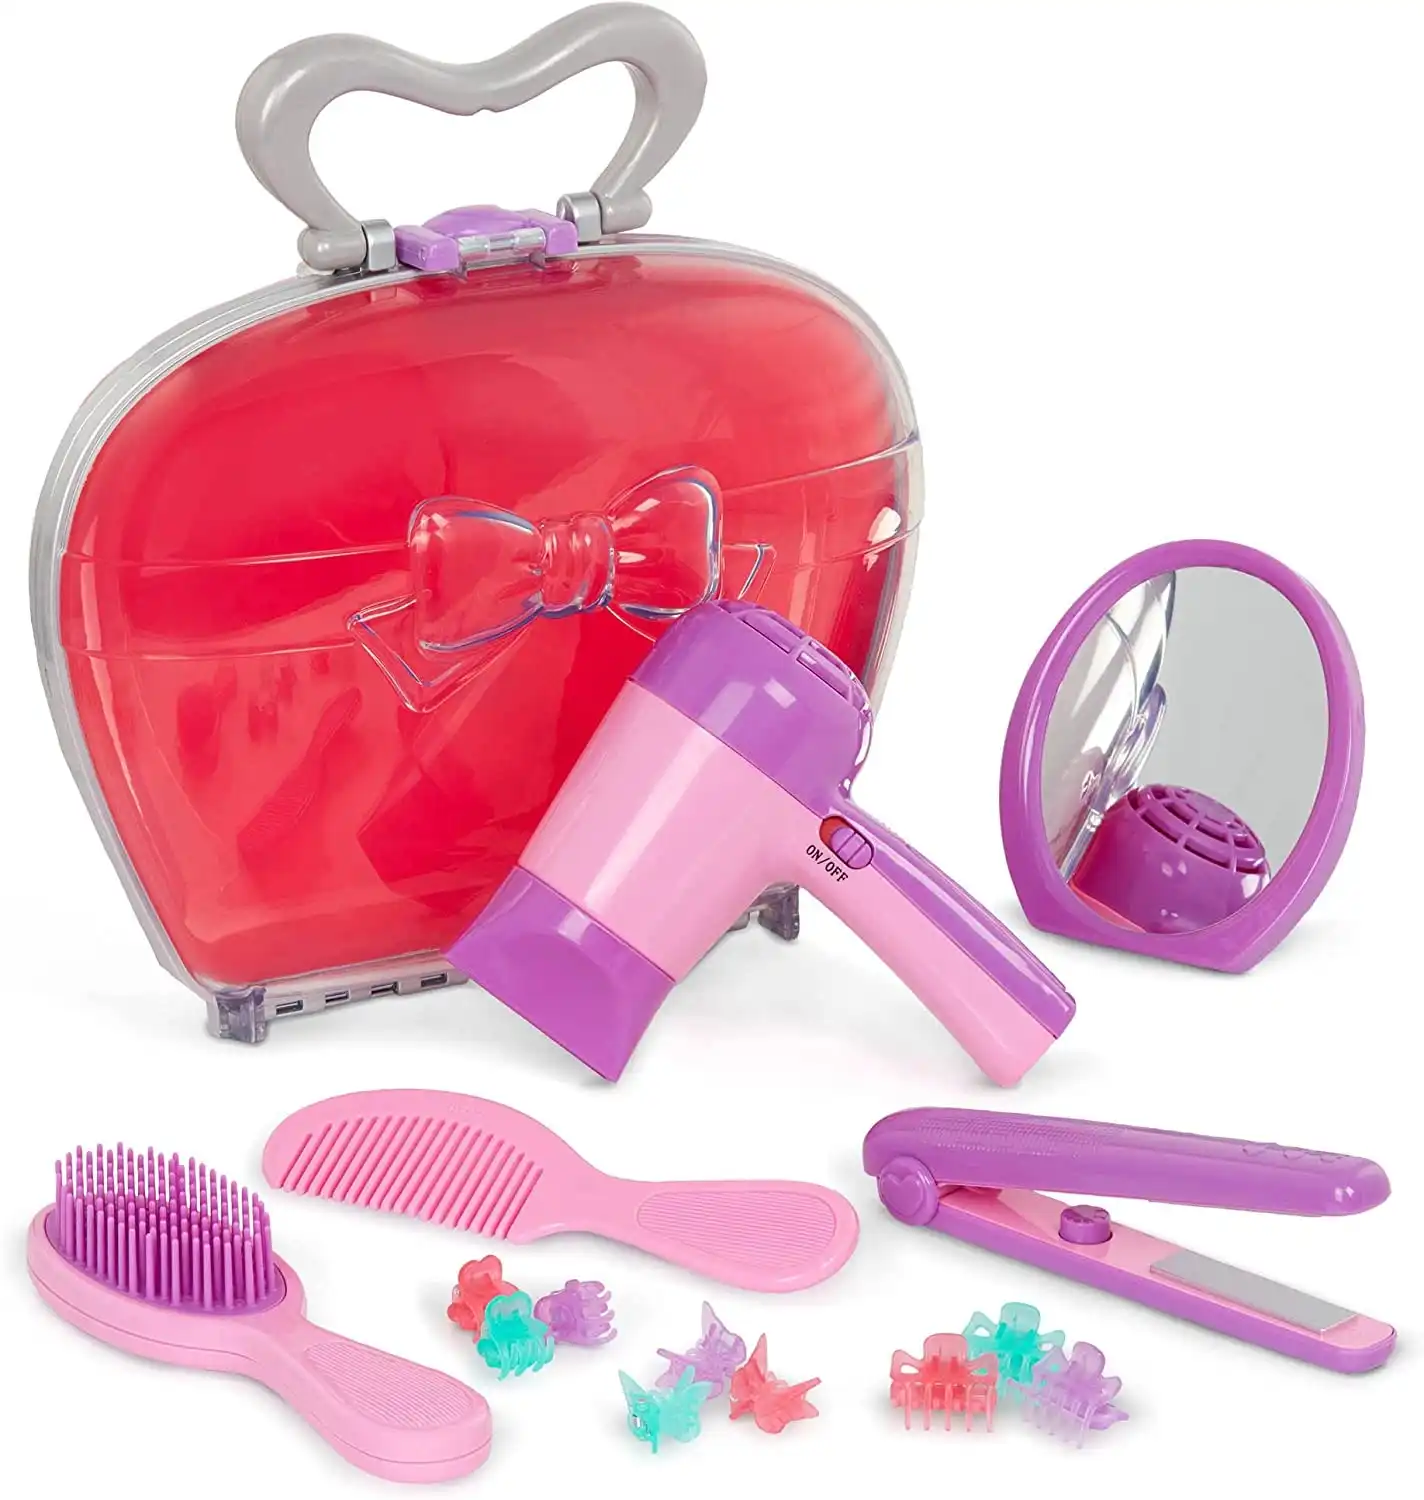 Pink Beauty Shop Hairdressing Set, Mirror, Brush Kit, Working Hair Dryer with Sounds & Air, Salon Accessories